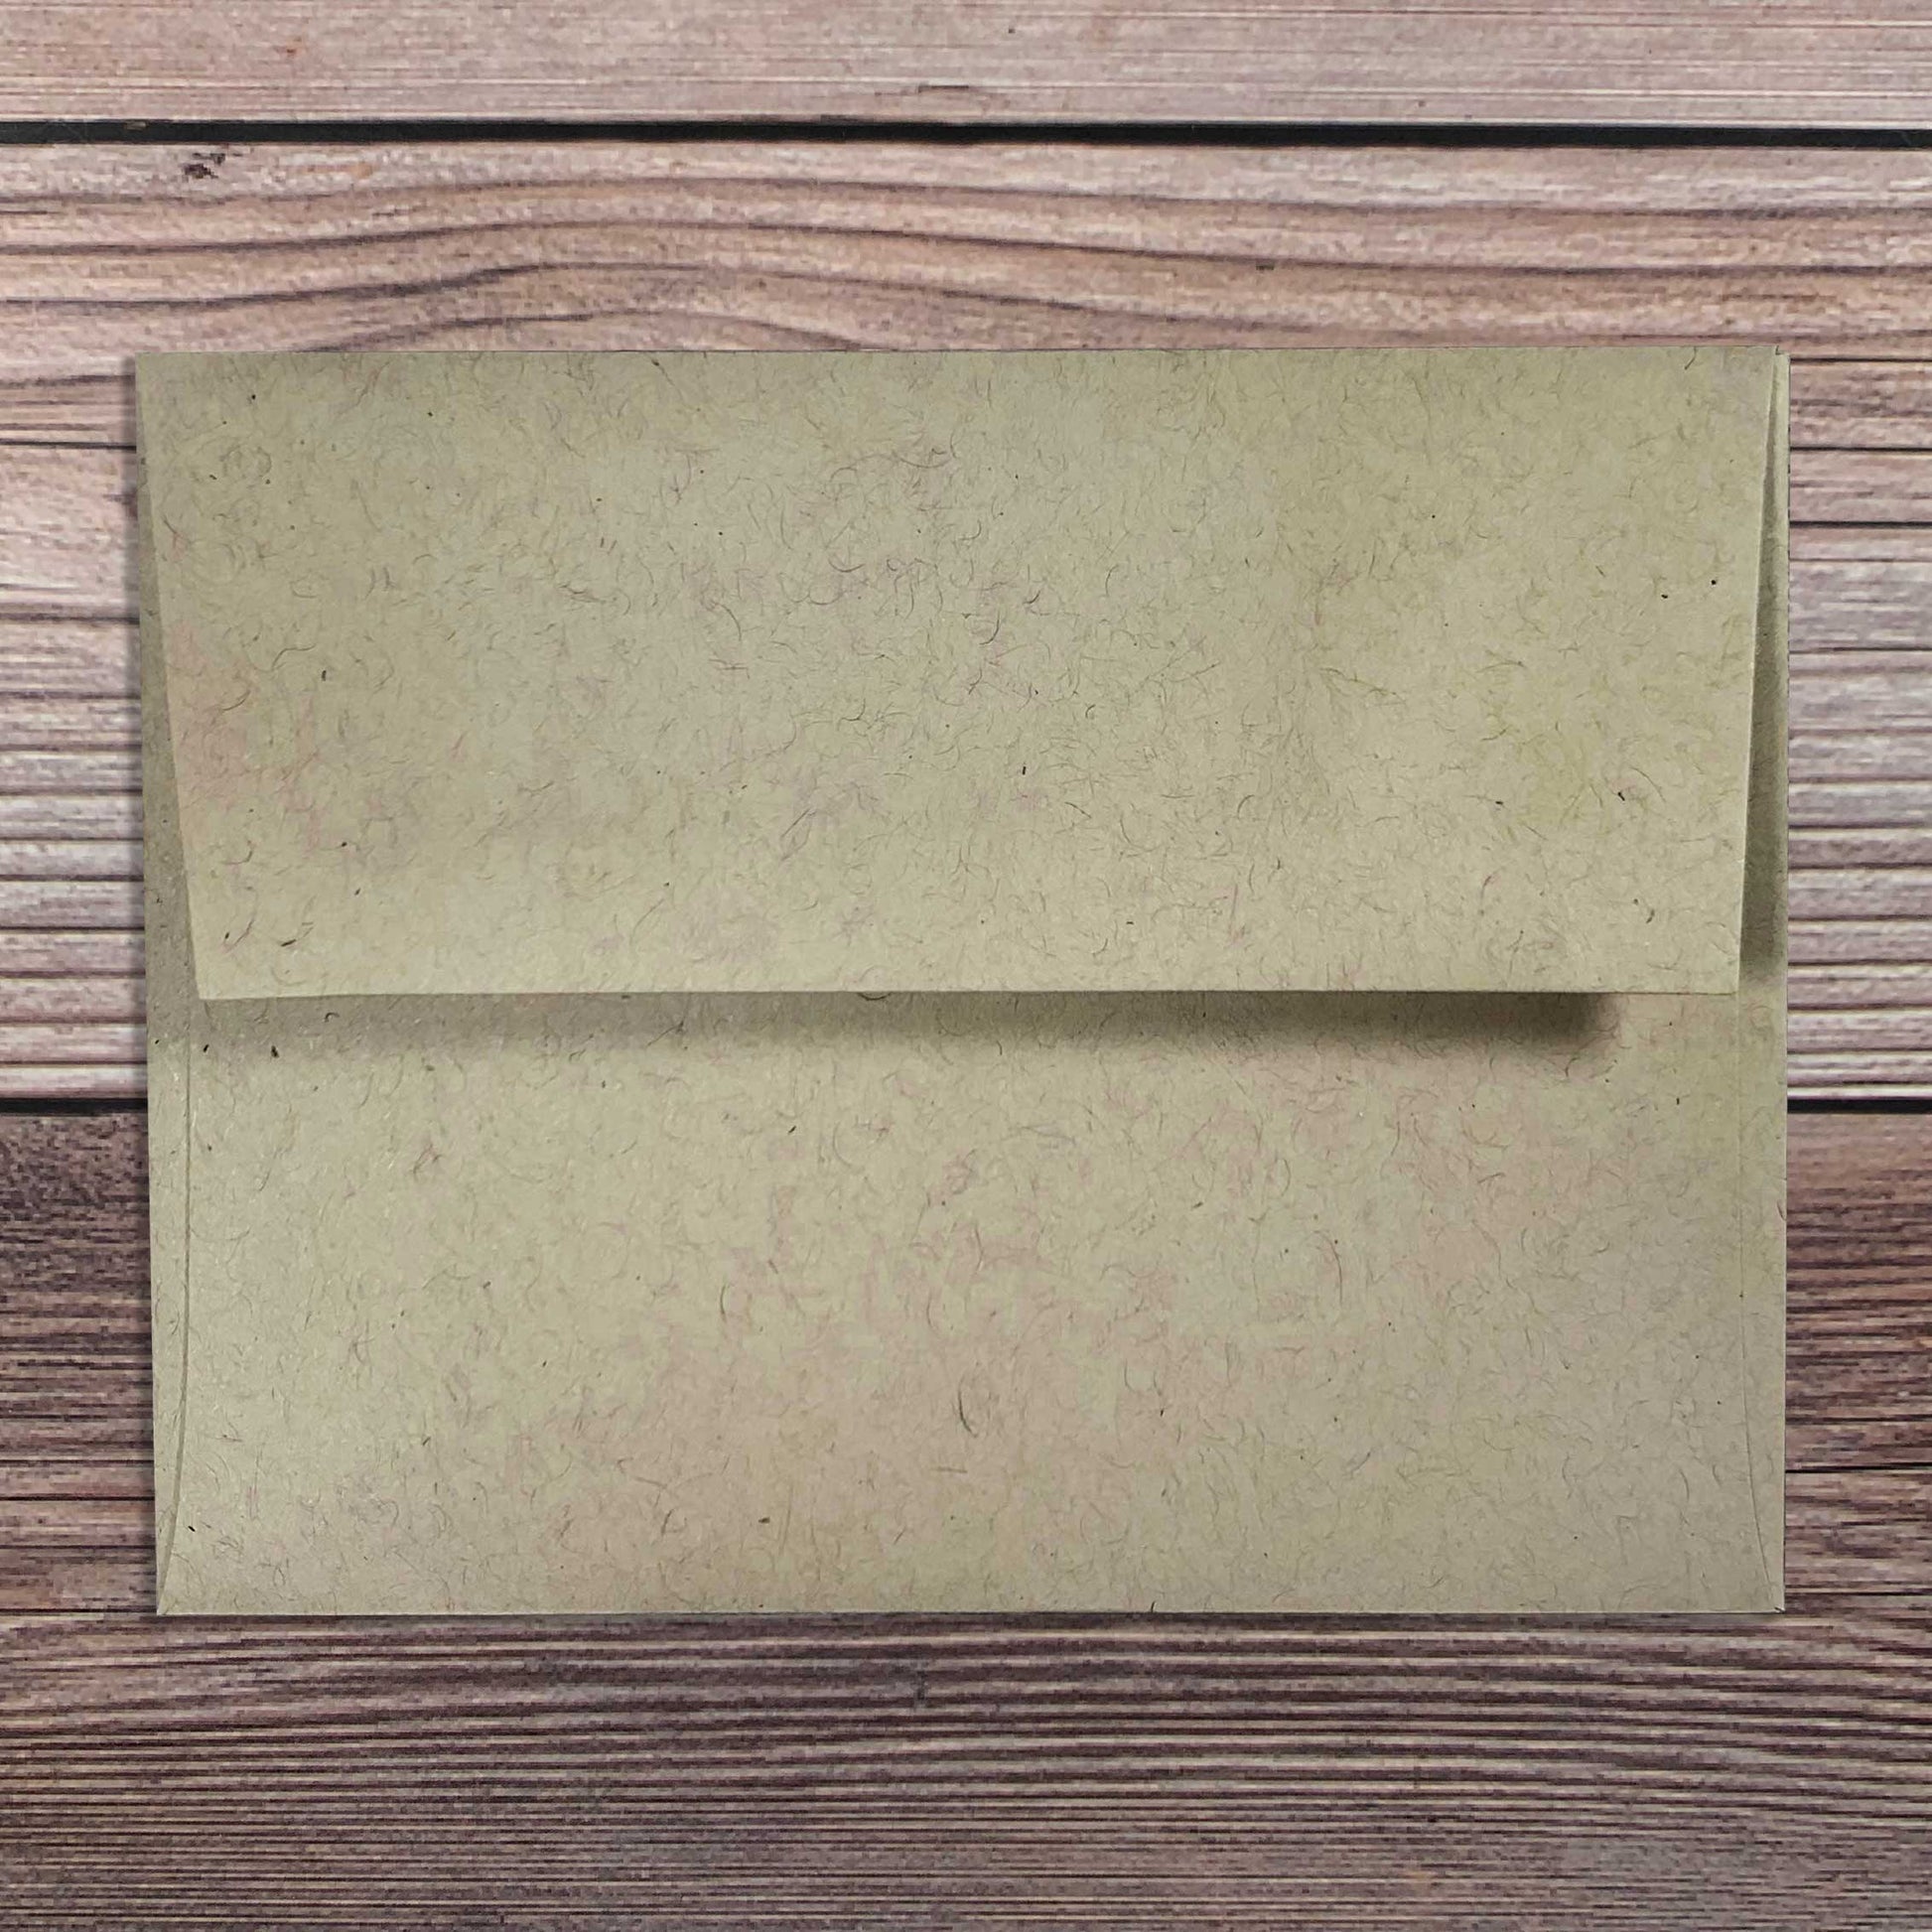 Greeting Card envelope, kraft color, square flap, included with letterpress baby card.